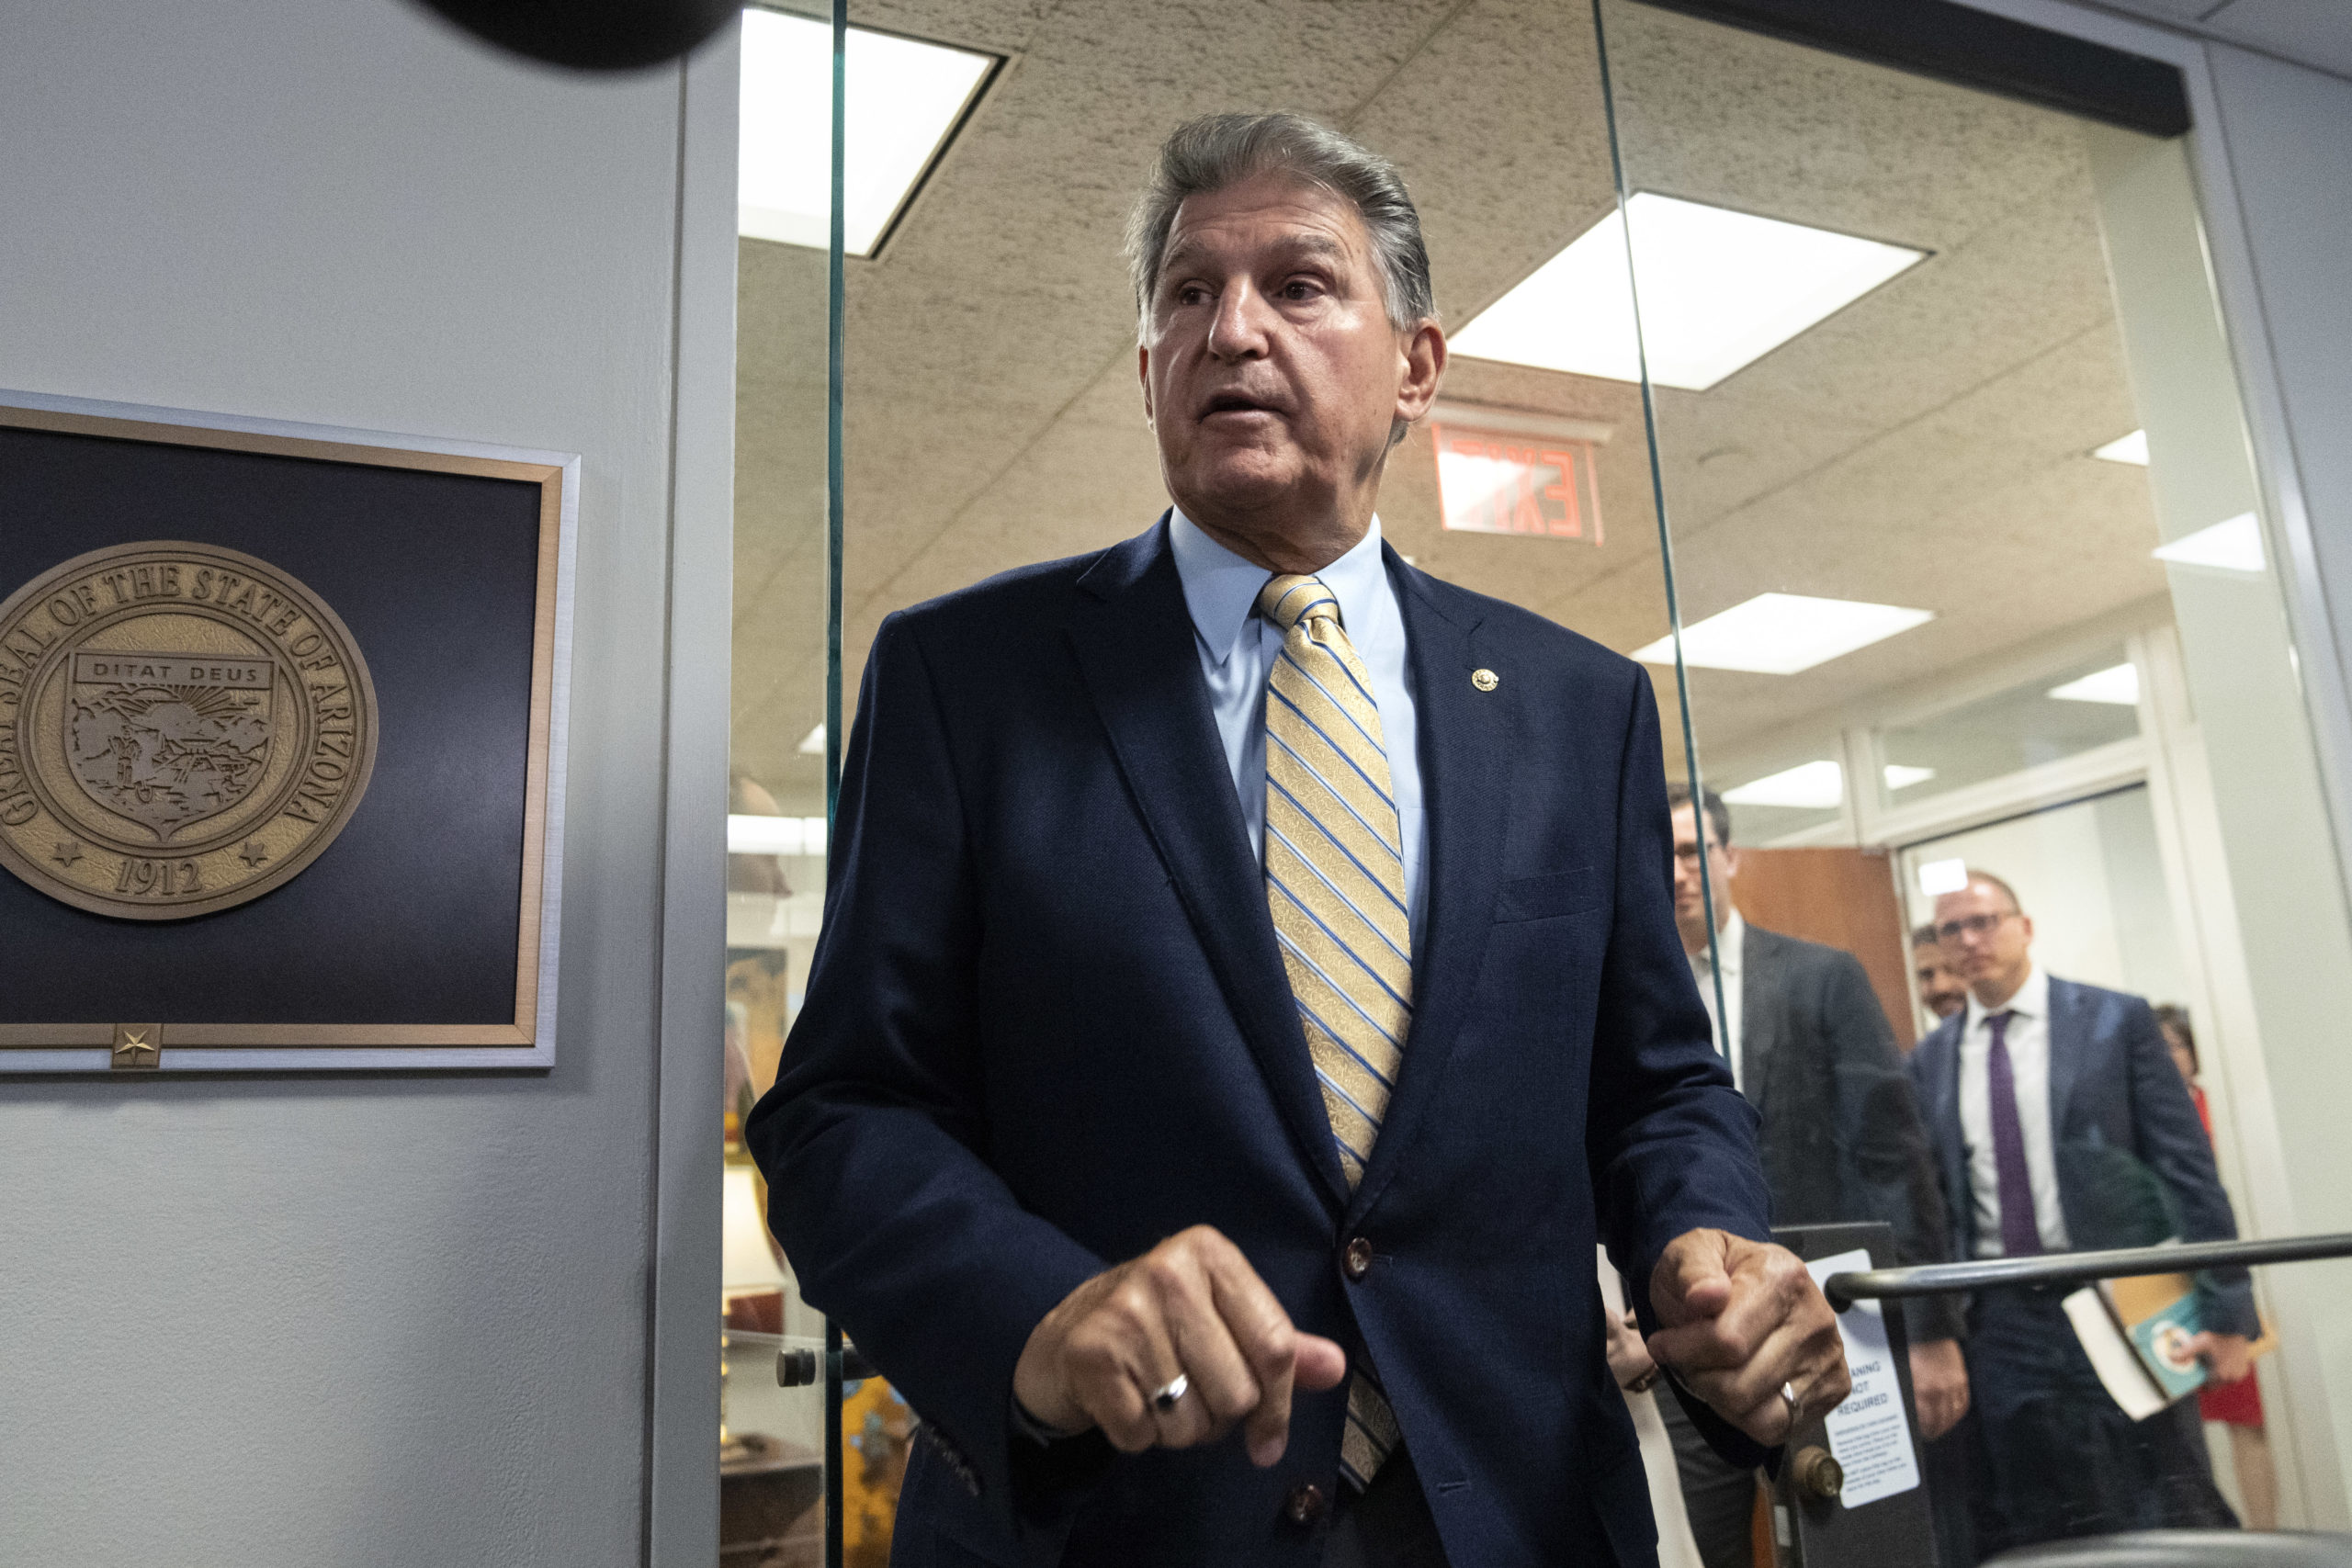 WASHINGTON, DC - JUNE 22: Sen. Joe Manchin (D-WV) leaves a meeting of bipartisan Senators in the office of Sen. Kyrsten Sinema (D-AZ) on Capitol Hill June 22, 2021 in Washington, DC. The Senate will hold a procedural vote on the For the People Act later on Tuesday, a voting rights bill championed by Democrats in Congress. (Photo by Drew Angerer/Getty Images)